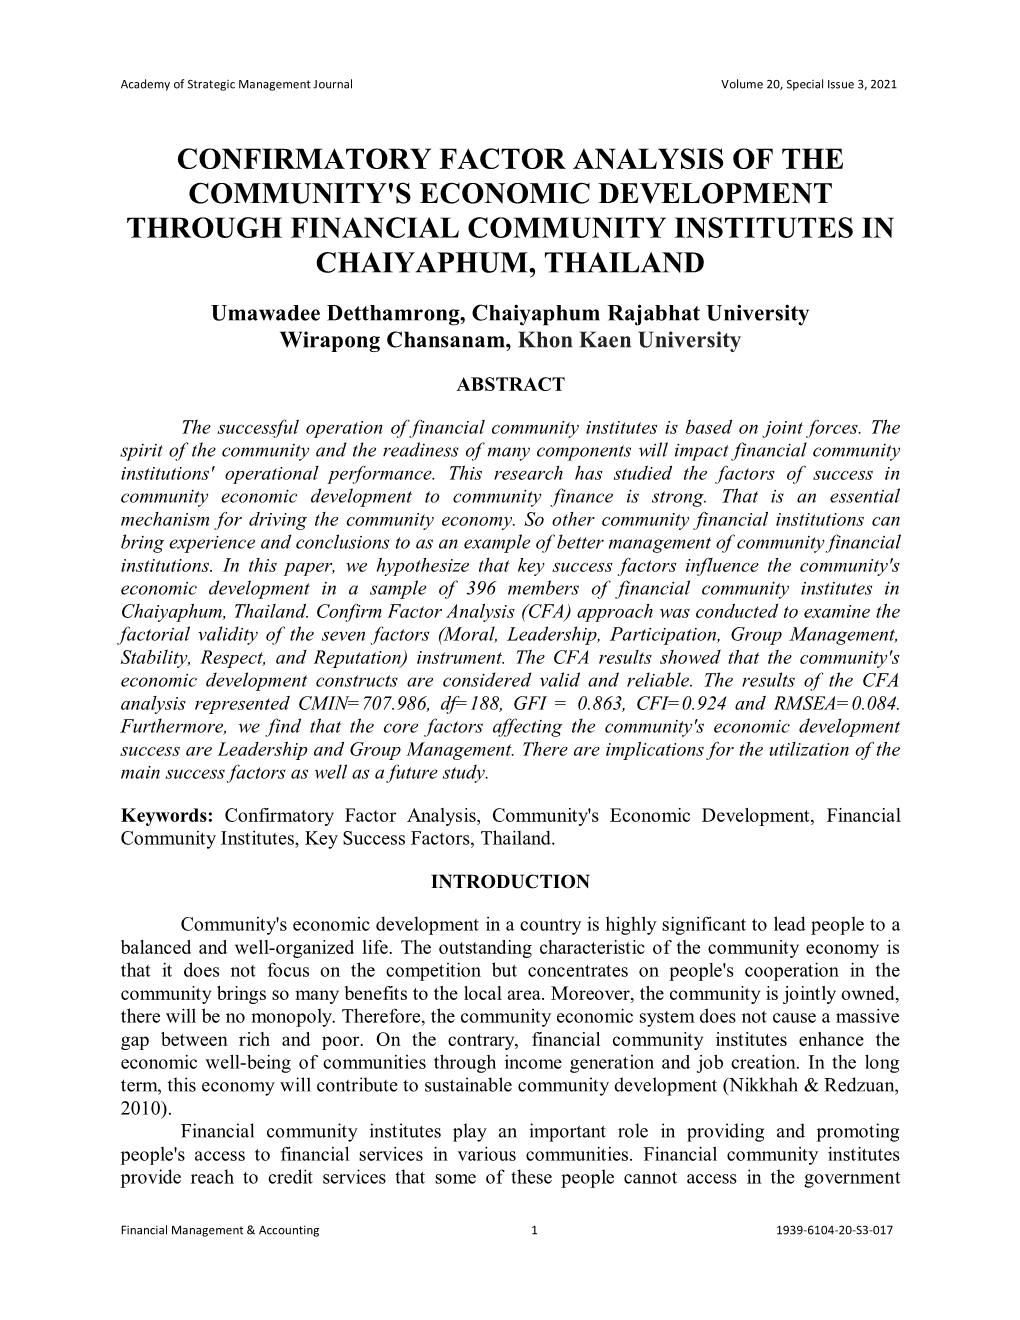 Confirmatory Factor Analysis of the Community's Economic Development Through Financial Community Institutes in Chaiyaphum, Thailand